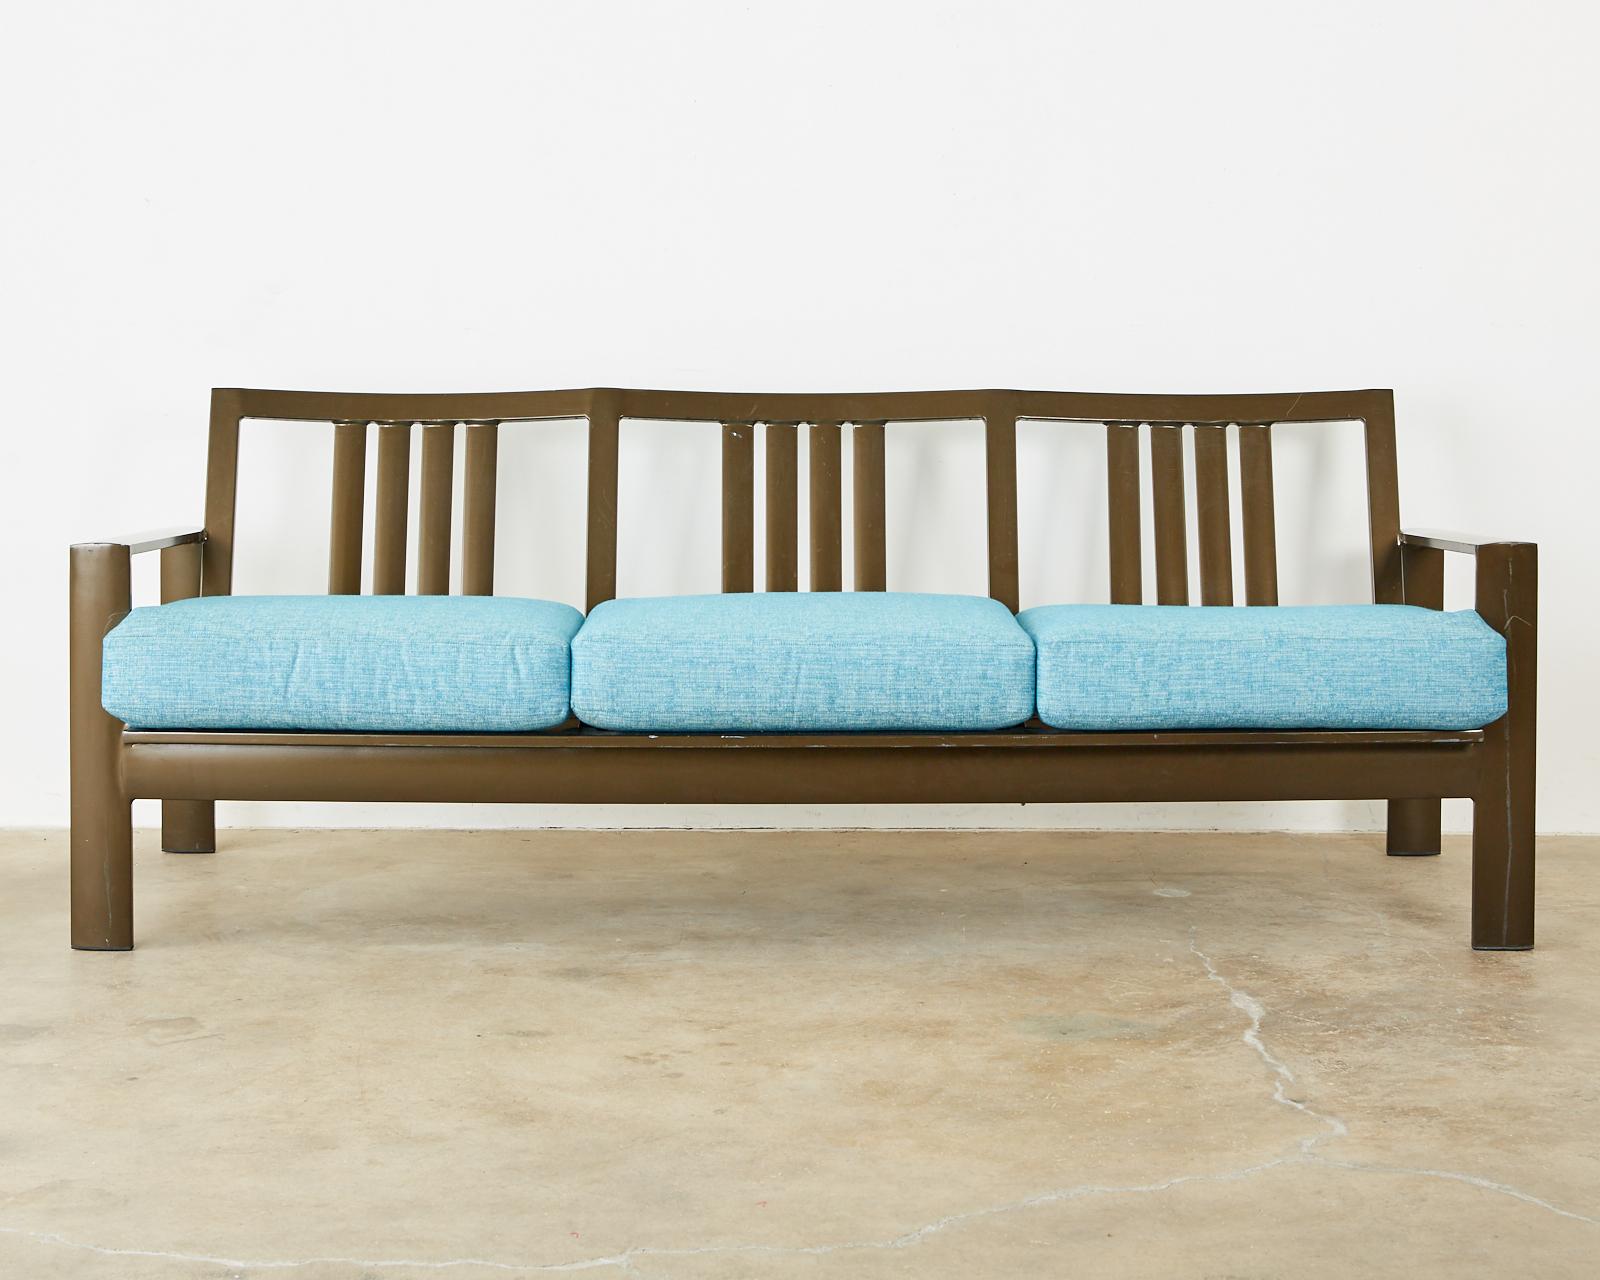 Luxurious wrought aluminum patio and garden sofas designed by John Caldwell for Brown Jordan known as the Parkway cushion sofa with a sleek profile and stylish bronzed finish. Topped with colorful teal plush all weather cushions. The generous